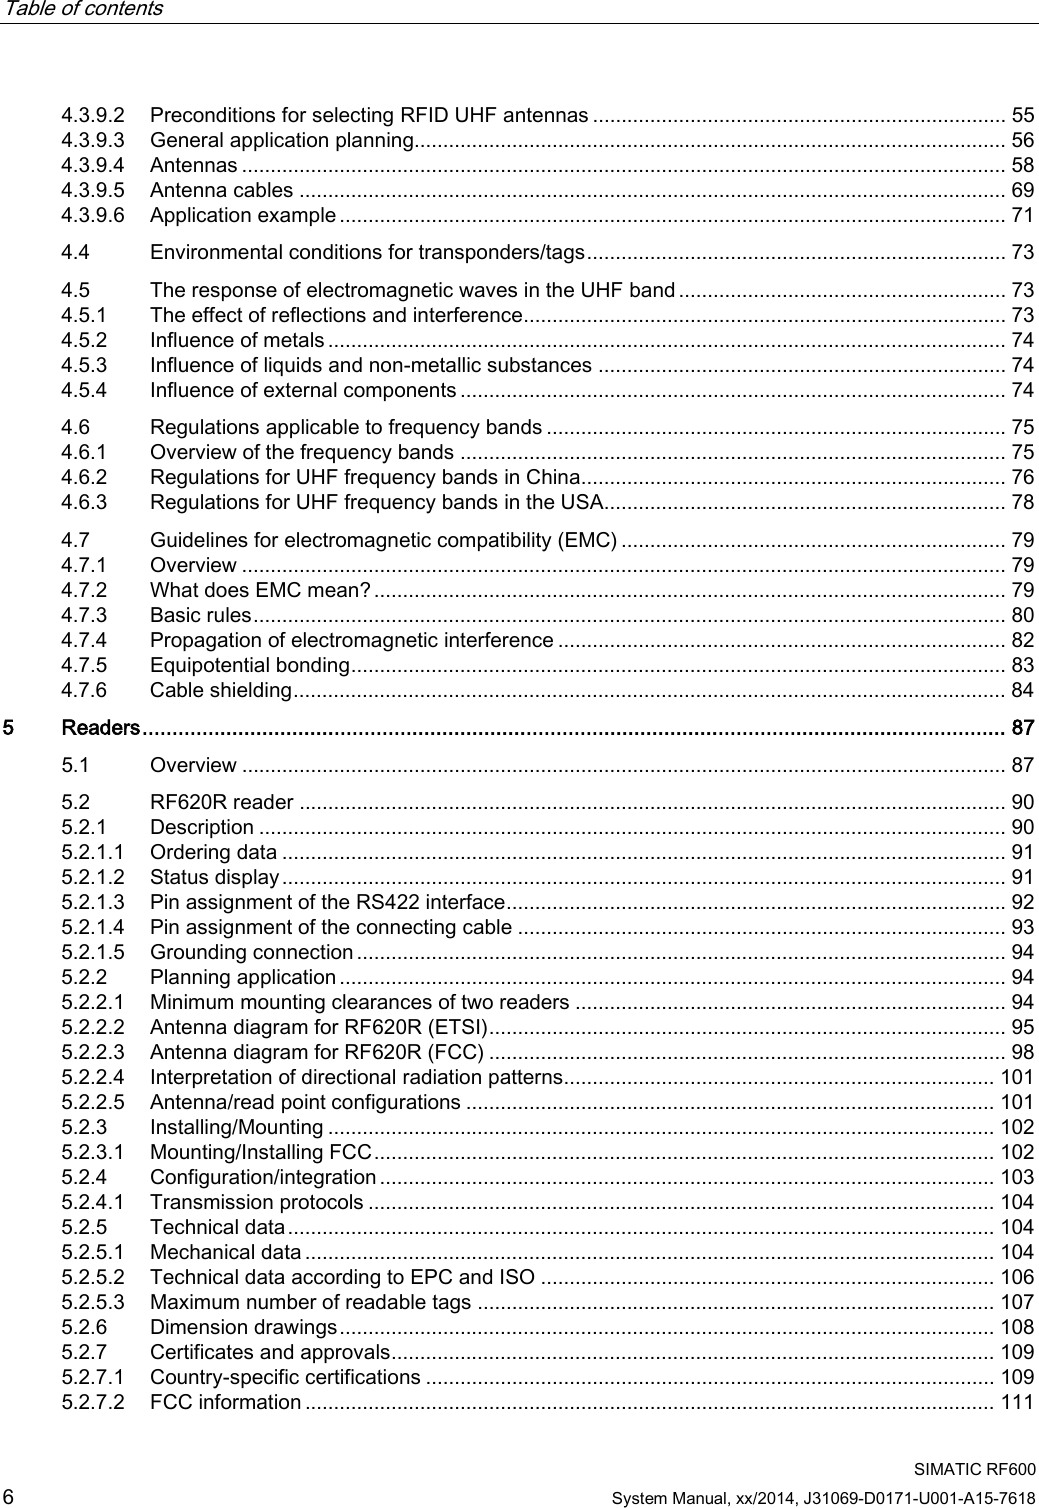 Table of contents      SIMATIC RF600 6 System Manual, xx/2014, J31069-D0171-U001-A15-7618 4.3.9.2 Preconditions for selecting RFID UHF antennas ........................................................................ 55 4.3.9.3 General application planning....................................................................................................... 56 4.3.9.4 Antennas ..................................................................................................................................... 58 4.3.9.5 Antenna cables ........................................................................................................................... 69 4.3.9.6 Application example .................................................................................................................... 71 4.4 Environmental conditions for transponders/tags ......................................................................... 73 4.5 The response of electromagnetic waves in the UHF band ......................................................... 73 4.5.1 The effect of reflections and interference .................................................................................... 73 4.5.2 Influence of metals ...................................................................................................................... 74 4.5.3 Influence of liquids and non-metallic substances ....................................................................... 74 4.5.4 Influence of external components ............................................................................................... 74 4.6 Regulations applicable to frequency bands ................................................................................ 75 4.6.1 Overview of the frequency bands ............................................................................................... 75 4.6.2 Regulations for UHF frequency bands in China.......................................................................... 76 4.6.3 Regulations for UHF frequency bands in the USA...................................................................... 78 4.7 Guidelines for electromagnetic compatibility (EMC) ................................................................... 79 4.7.1 Overview ..................................................................................................................................... 79 4.7.2 What does EMC mean? .............................................................................................................. 79 4.7.3 Basic rules ................................................................................................................................... 80 4.7.4 Propagation of electromagnetic interference .............................................................................. 82 4.7.5 Equipotential bonding .................................................................................................................. 83 4.7.6 Cable shielding ............................................................................................................................ 84 5  Readers ................................................................................................................................................ 87 5.1  Overview ..................................................................................................................................... 87 5.2 RF620R reader ........................................................................................................................... 90 5.2.1 Description .................................................................................................................................. 90 5.2.1.1 Ordering data .............................................................................................................................. 91 5.2.1.2 Status display .............................................................................................................................. 91 5.2.1.3 Pin assignment of the RS422 interface ....................................................................................... 92 5.2.1.4 Pin assignment of the connecting cable ..................................................................................... 93 5.2.1.5 Grounding connection ................................................................................................................. 94 5.2.2 Planning application .................................................................................................................... 94 5.2.2.1 Minimum mounting clearances of two readers ........................................................................... 94 5.2.2.2 Antenna diagram for RF620R (ETSI) .......................................................................................... 95 5.2.2.3 Antenna diagram for RF620R (FCC) .......................................................................................... 98 5.2.2.4 Interpretation of directional radiation patterns........................................................................... 101 5.2.2.5 Antenna/read point configurations ............................................................................................ 101 5.2.3 Installing/Mounting .................................................................................................................... 102 5.2.3.1 Mounting/Installing FCC ............................................................................................................ 102 5.2.4 Configuration/integration ........................................................................................................... 103 5.2.4.1 Transmission protocols ............................................................................................................. 104 5.2.5 Technical data ........................................................................................................................... 104 5.2.5.1 Mechanical data ........................................................................................................................ 104 5.2.5.2 Technical data according to EPC and ISO ............................................................................... 106 5.2.5.3 Maximum number of readable tags .......................................................................................... 107 5.2.6 Dimension drawings .................................................................................................................. 108 5.2.7 Certificates and approvals......................................................................................................... 109 5.2.7.1 Country-specific certifications ................................................................................................... 109 5.2.7.2 FCC information ........................................................................................................................ 111 